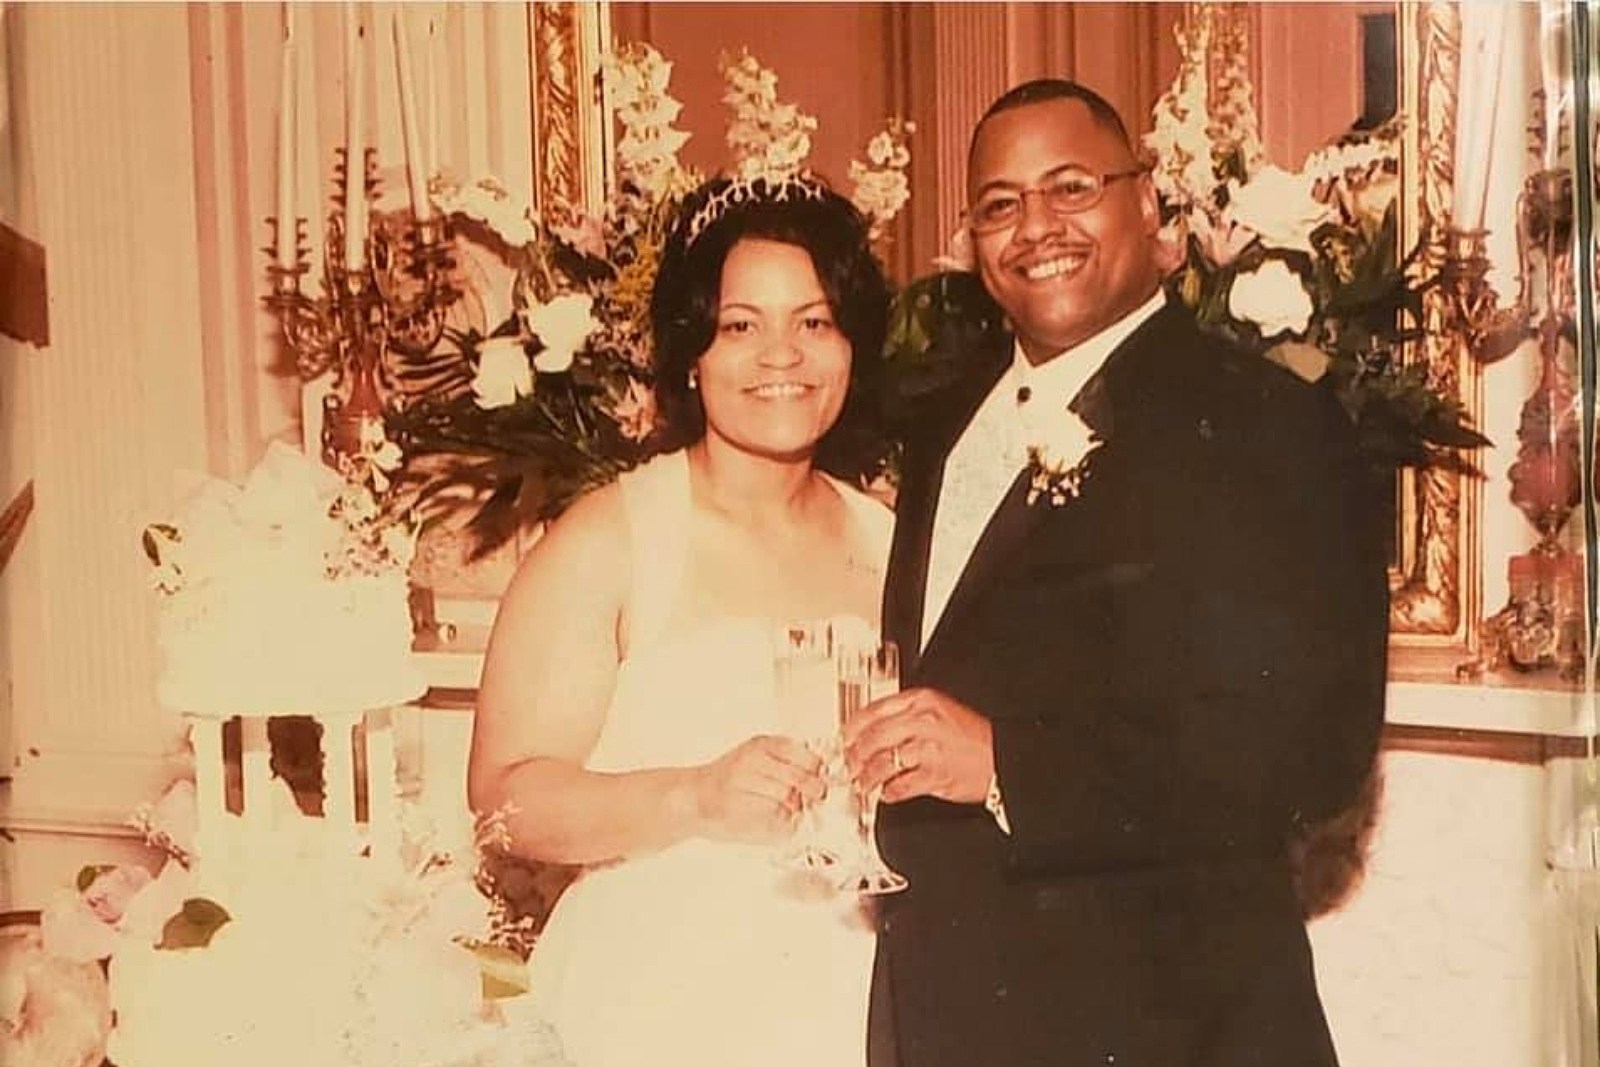 New Orleans Mourns: Mayor Latoya Cantrell’s Husband Remembered for Dedication and Service